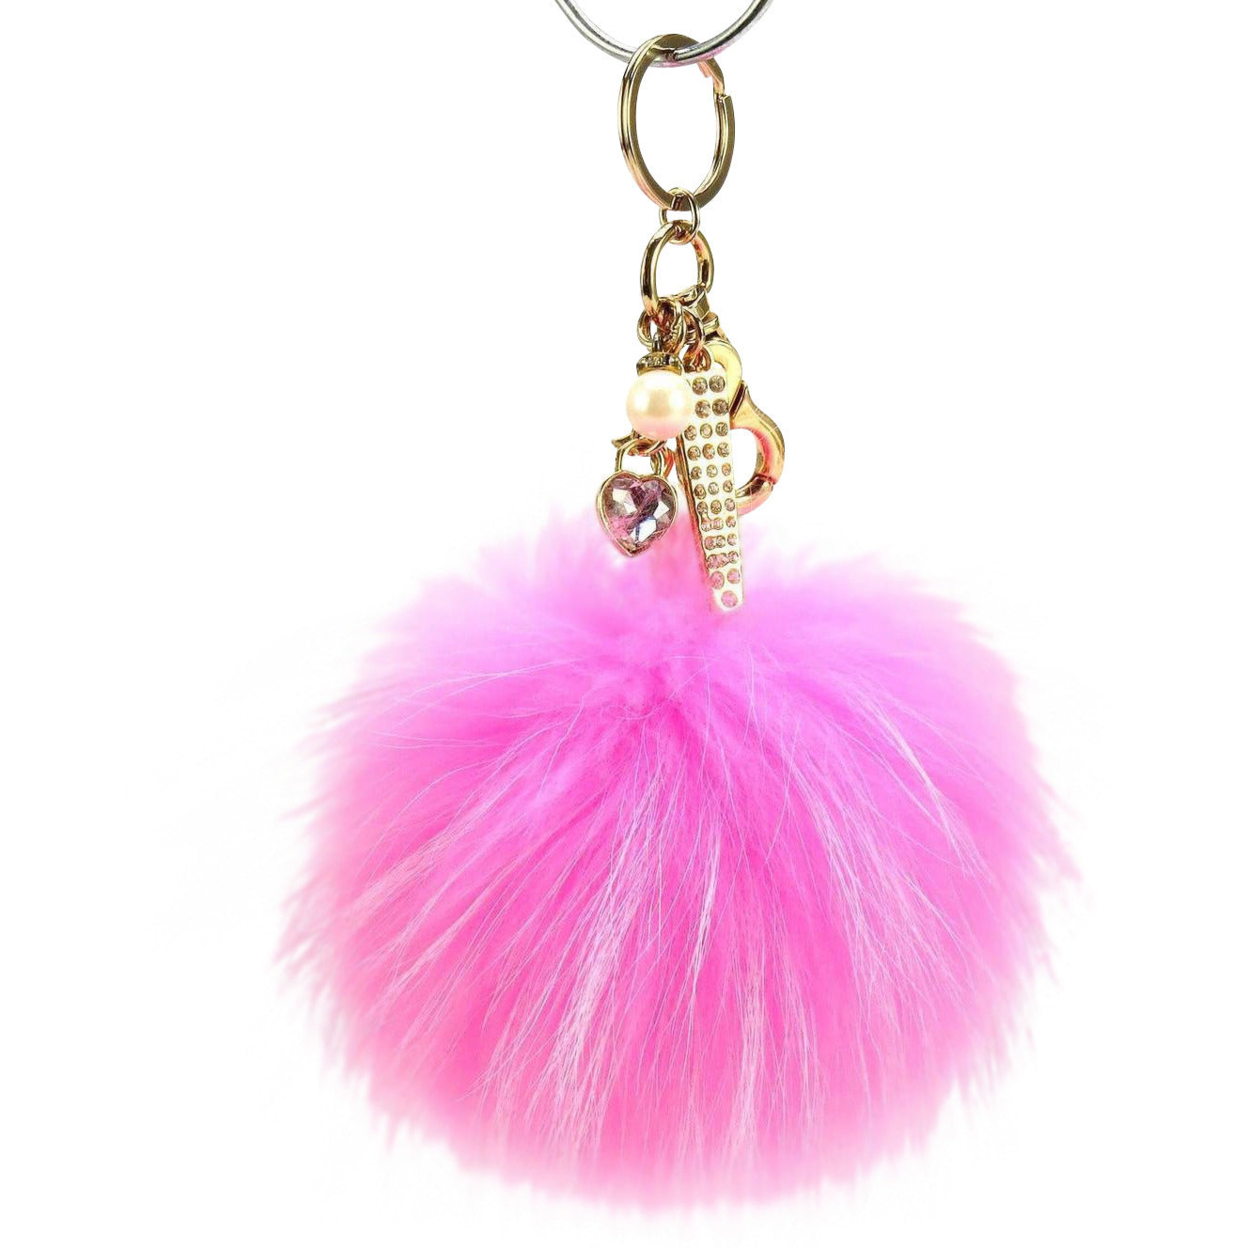 Real Fur Puff Ball Pom-Pom 6 Accessory Dangle Purse Charm - Pink With Gold Hardware